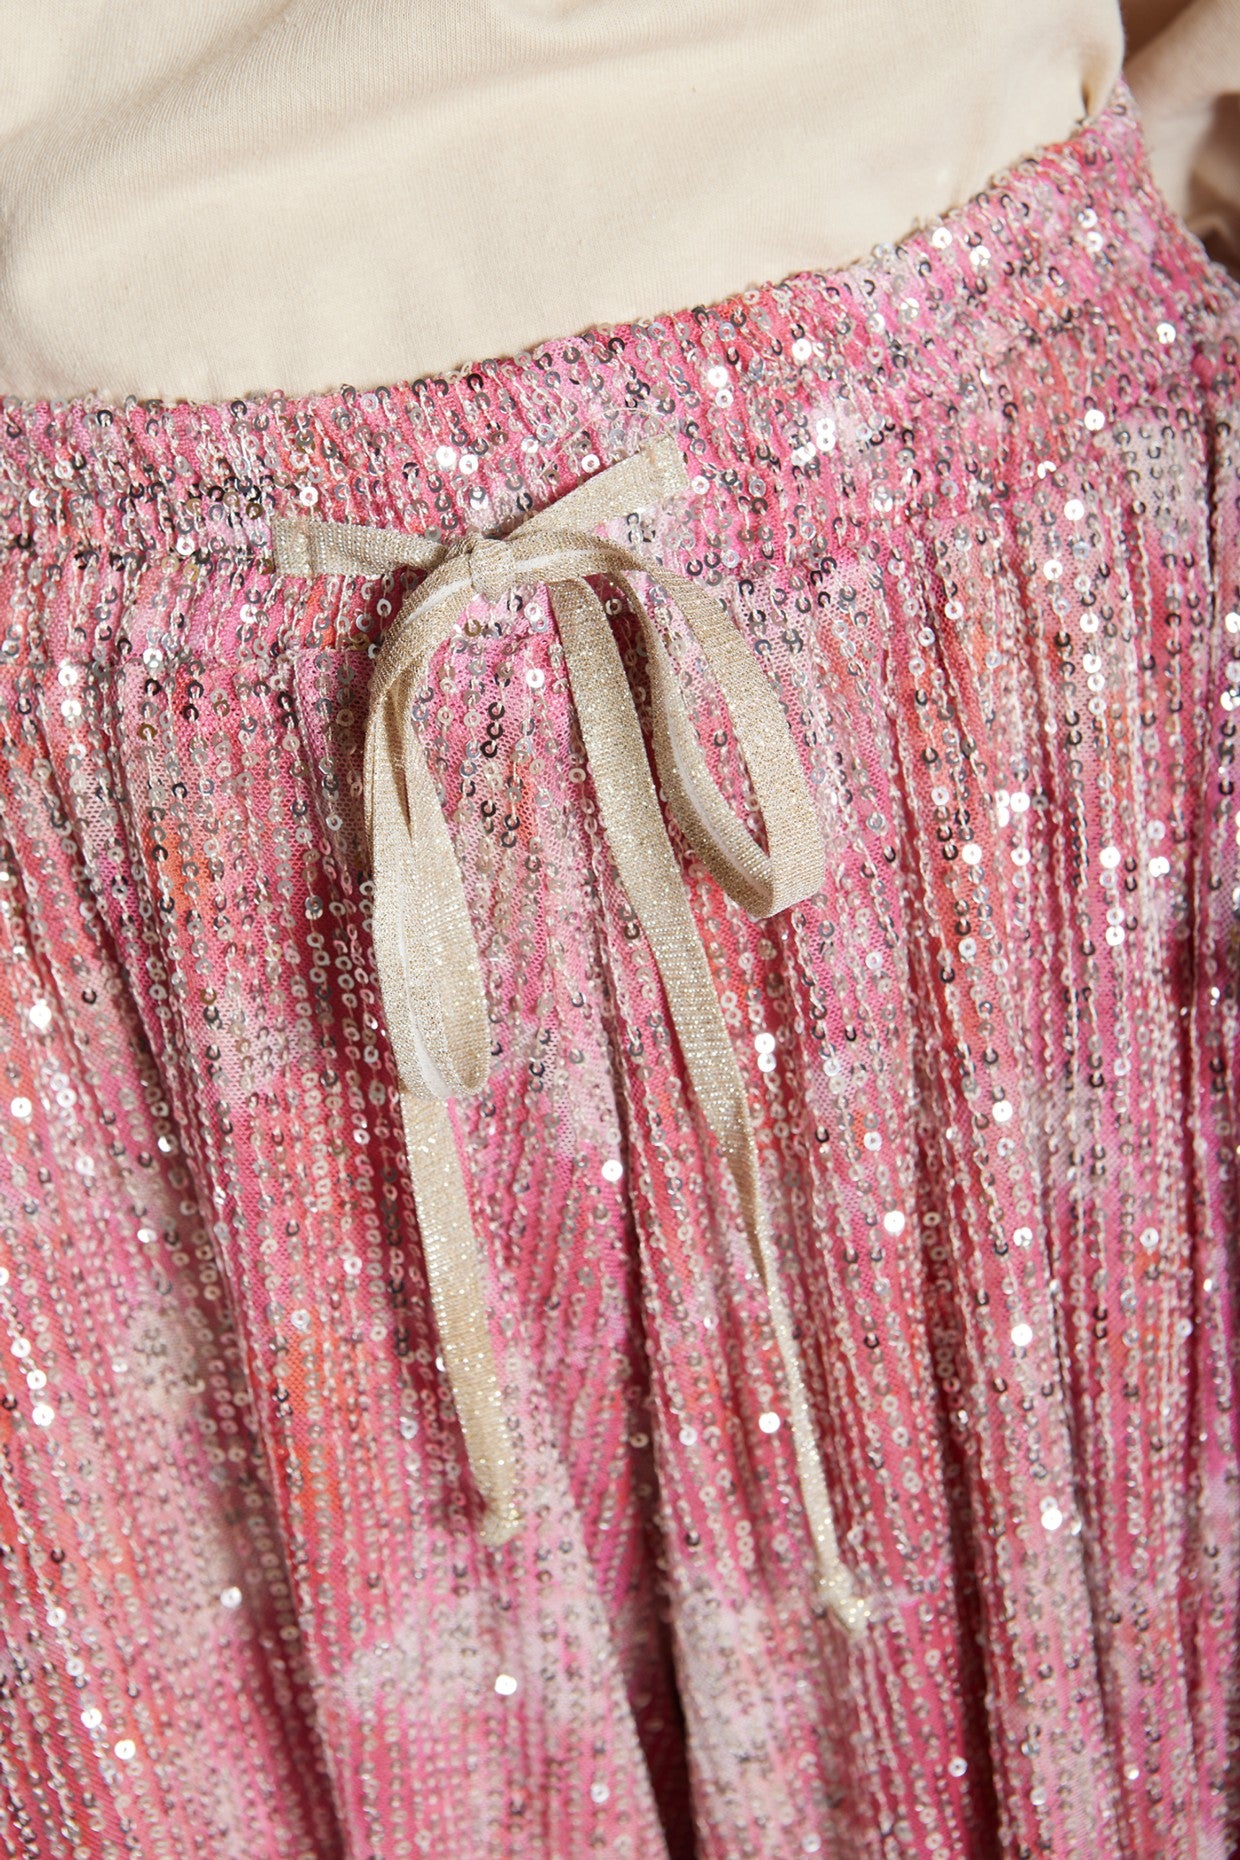 Gonna pantalone in paillettes rosa